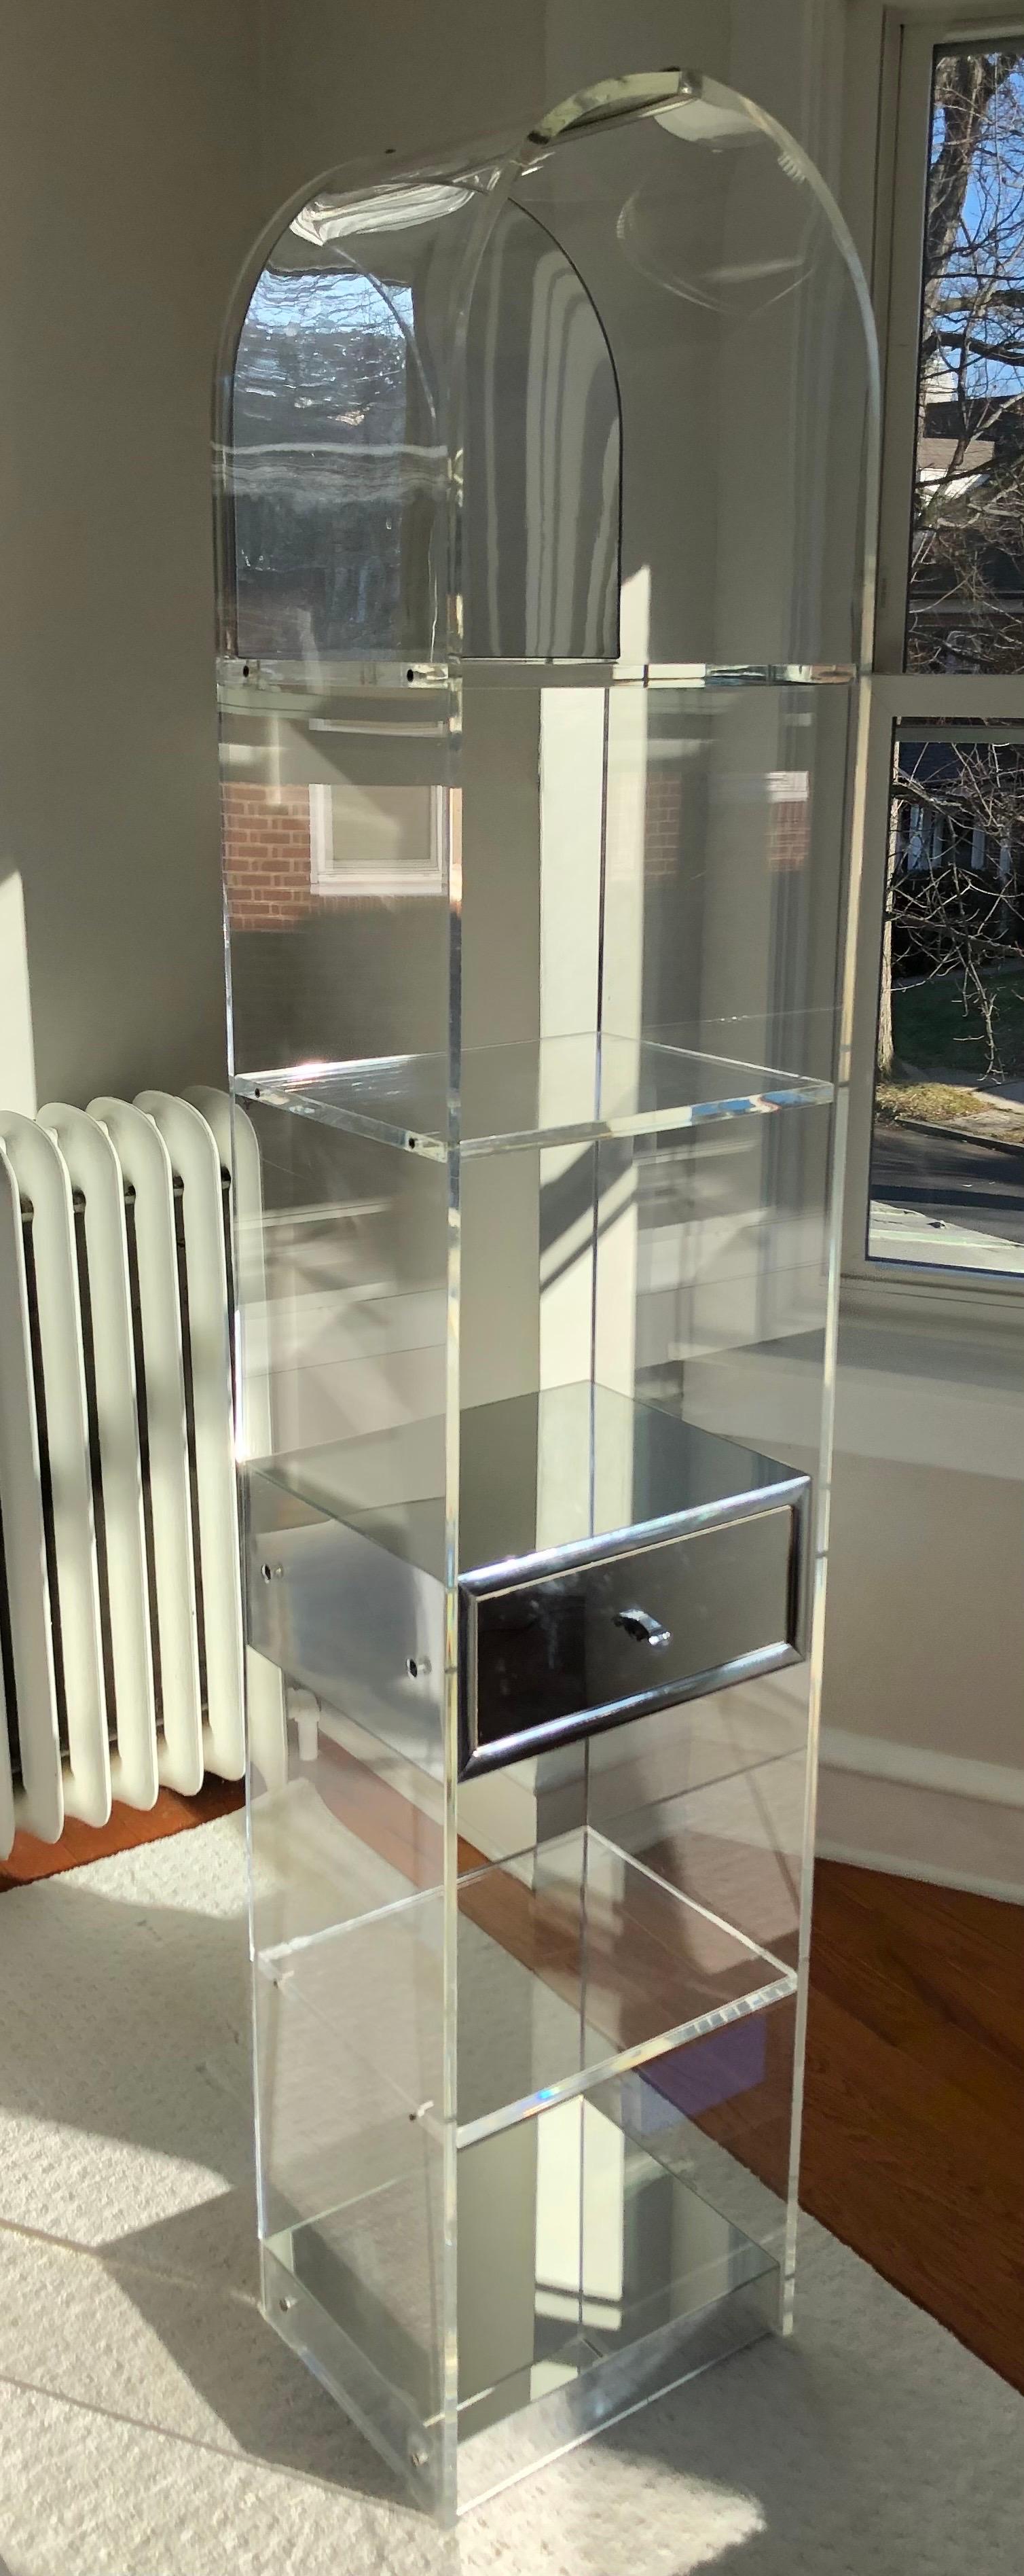 This is a 1970s Custom Domed Lucite Etagere with Chrome details.

It measures 12 inches deep, 15 inches wide and is 71 inches tall. The drawer is not functional. 